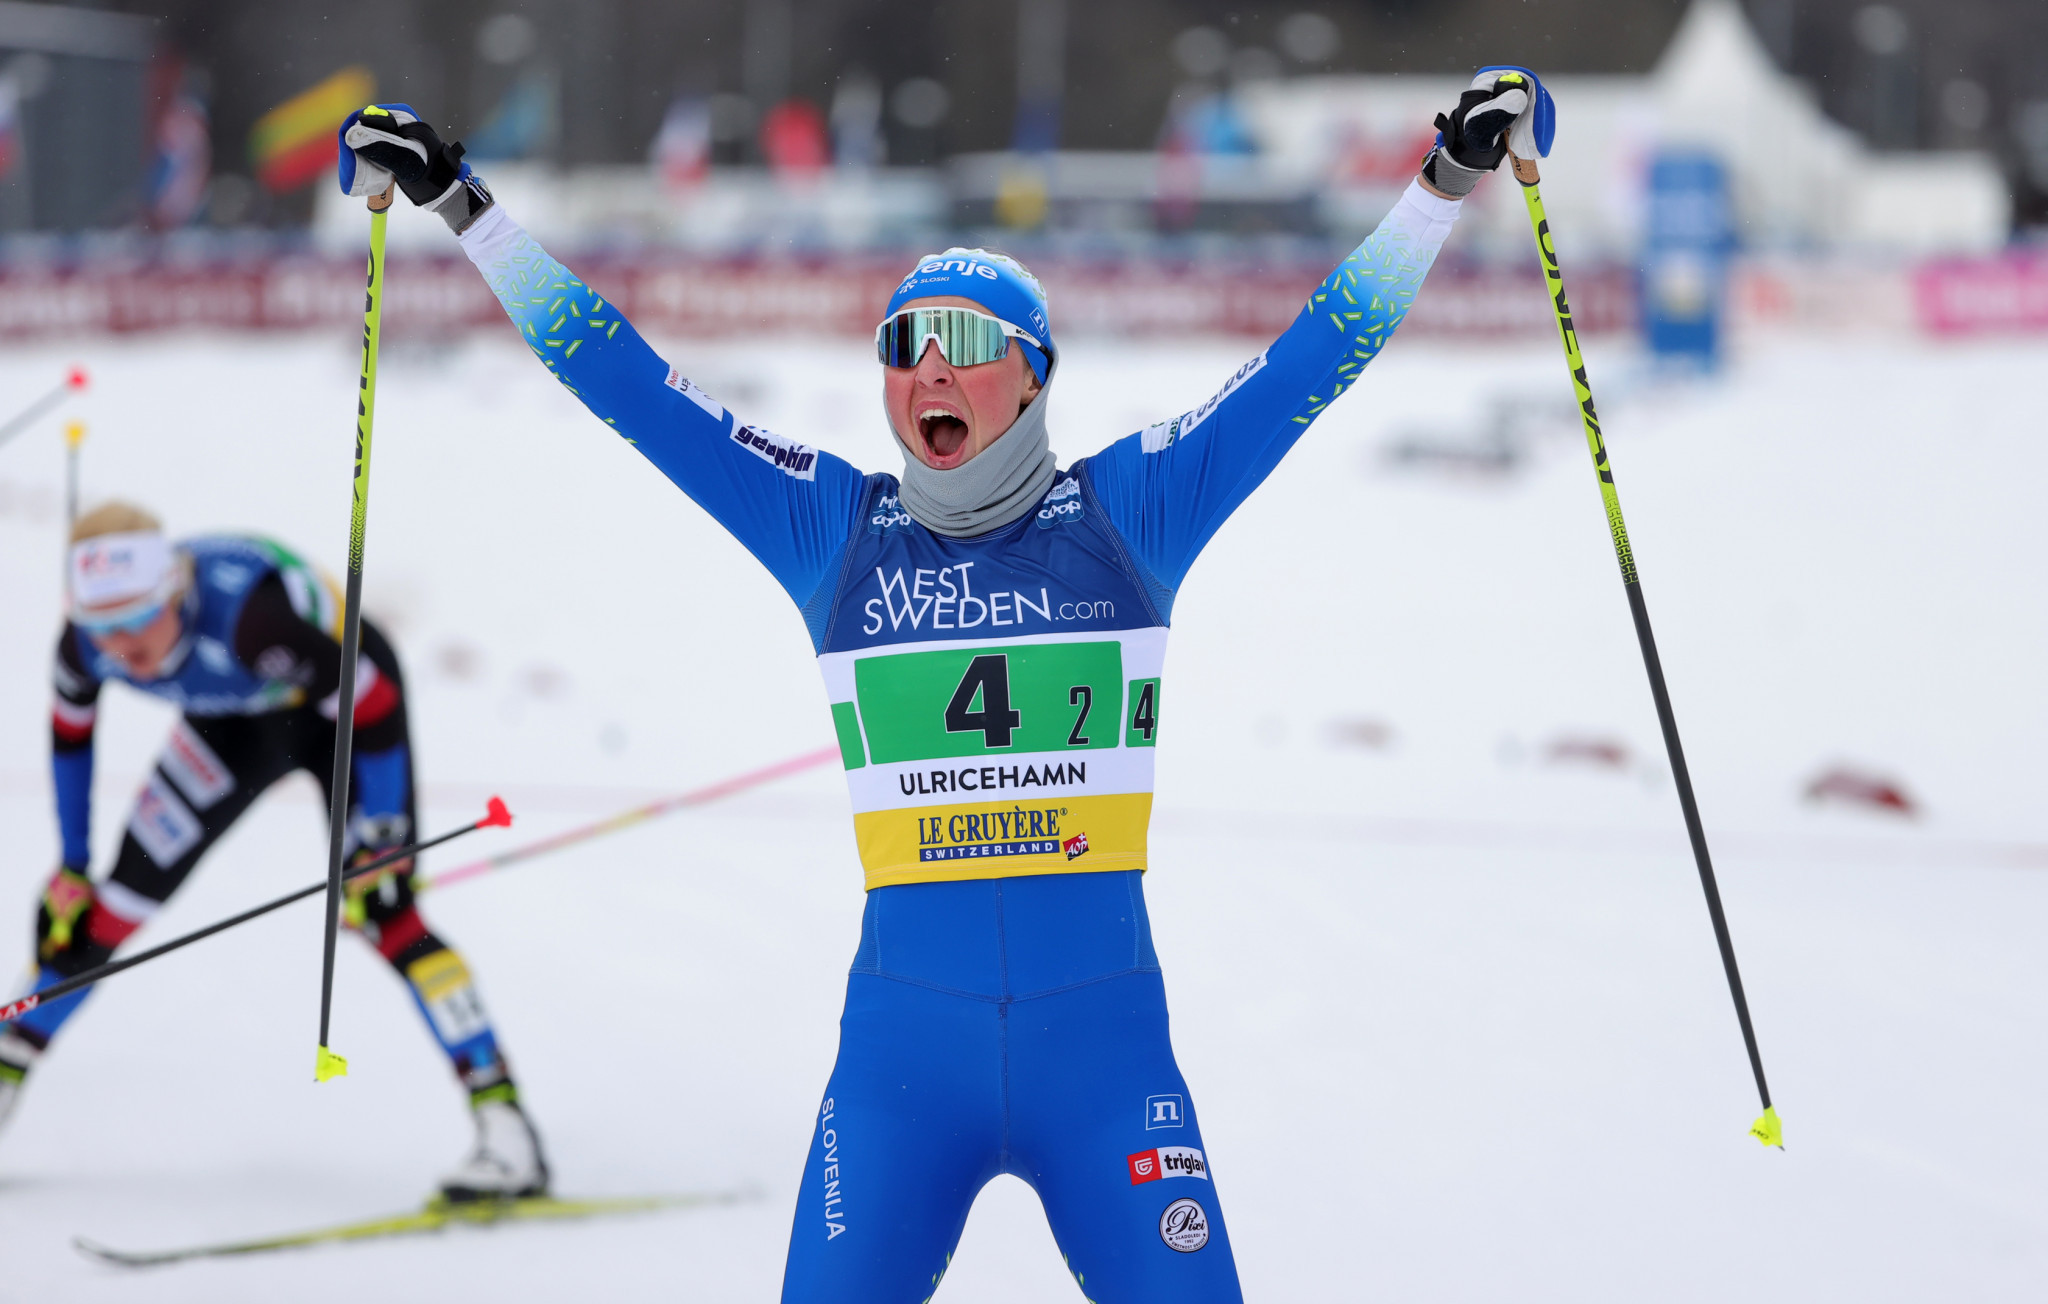 Anamarija Lampič celebrates after helping Slovenia win the women's team sprint competition in Ulricehamn ©Getty Images